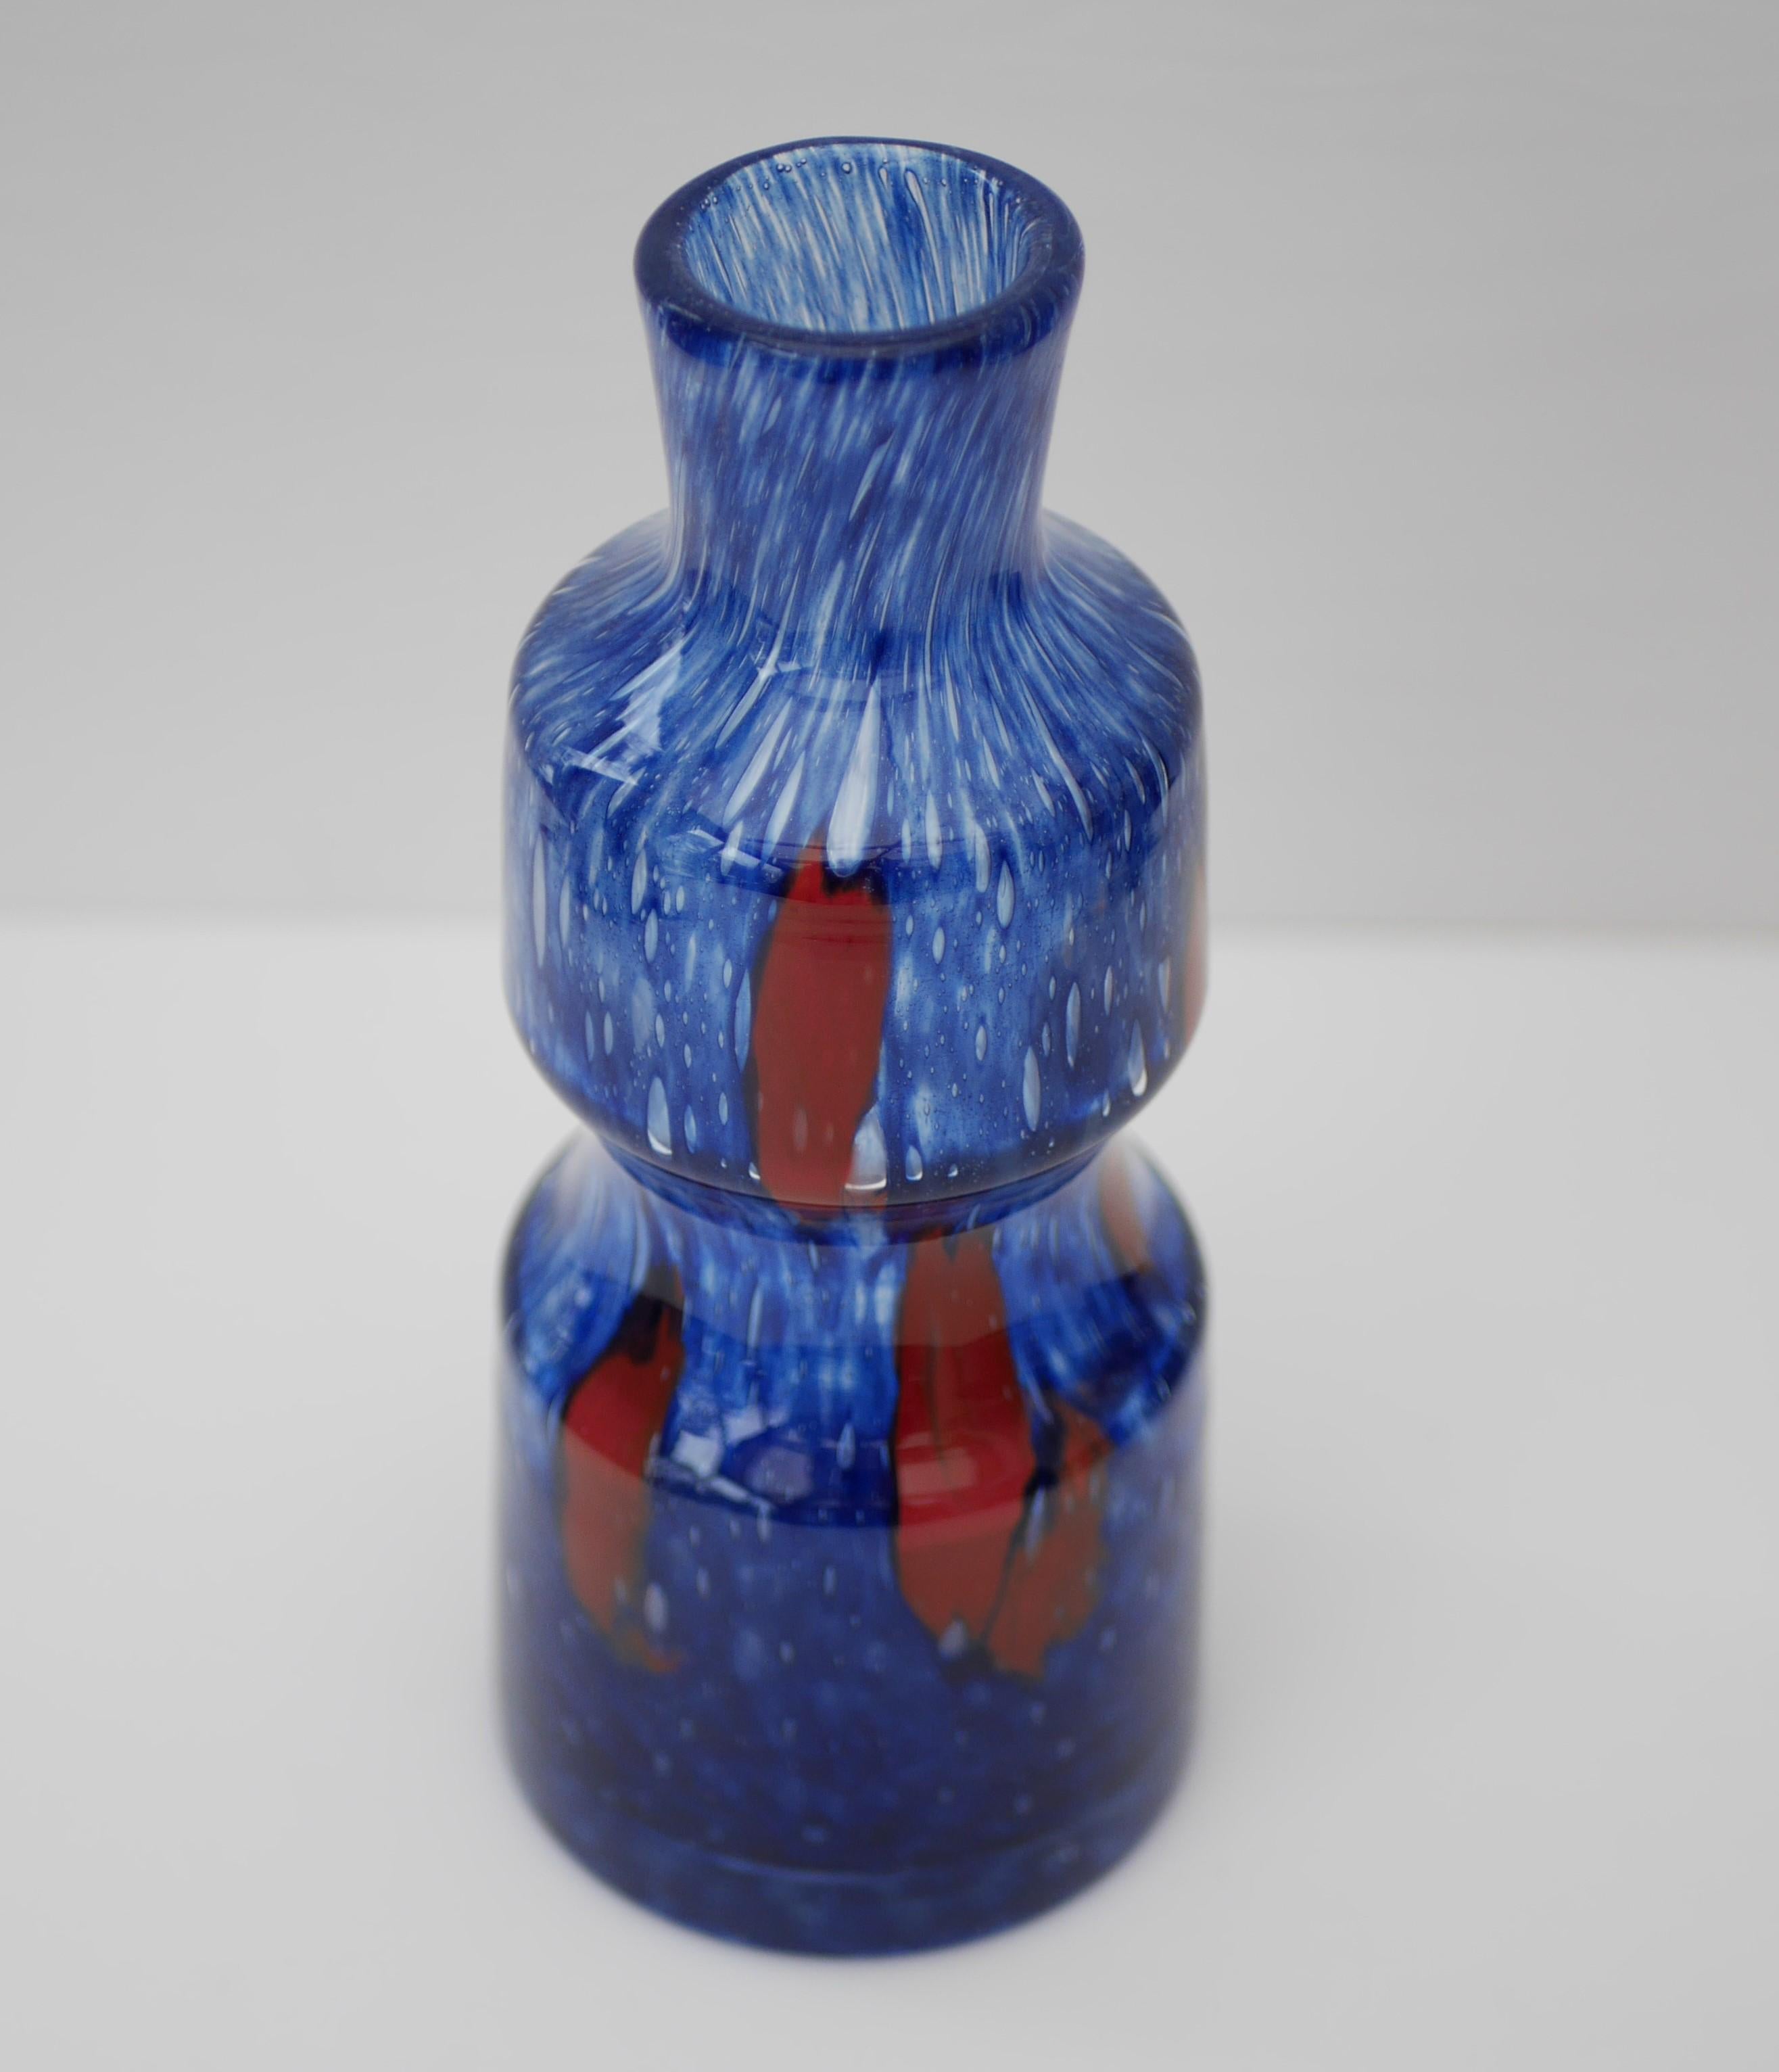 Hand-Crafted Blue Glass Art Vase from 'Prachen' Glass Works For Sale